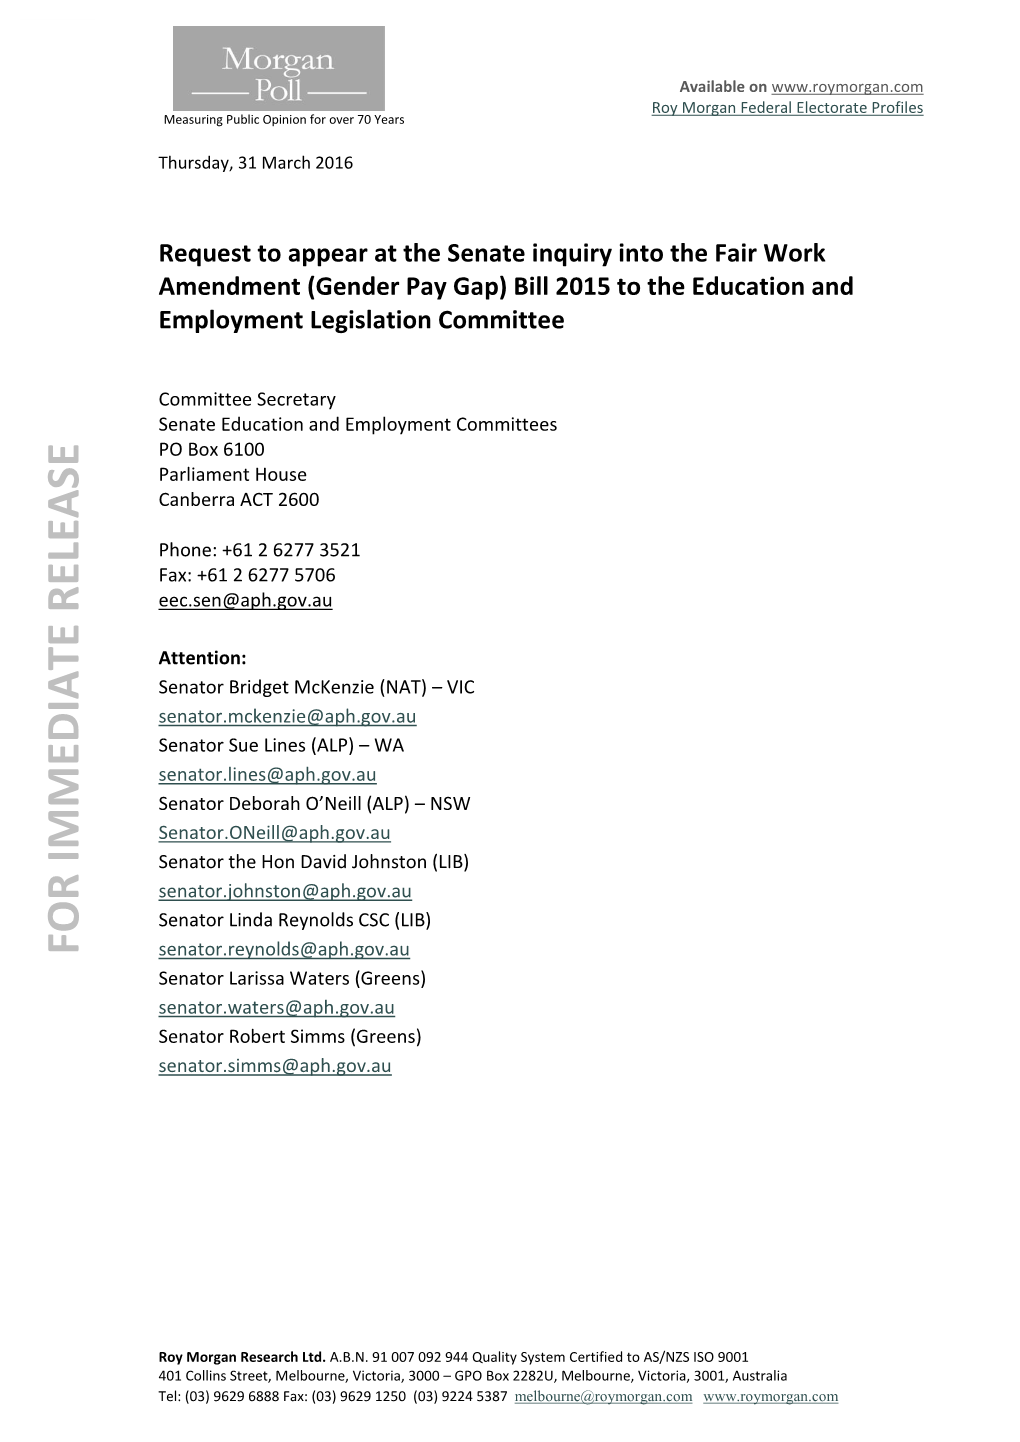 Request to Appear at the Senate Inquiry Into the Fair Work Amendment (Gender Pay Gap) Bill 2015 to the Education and Employment Legislation Committee